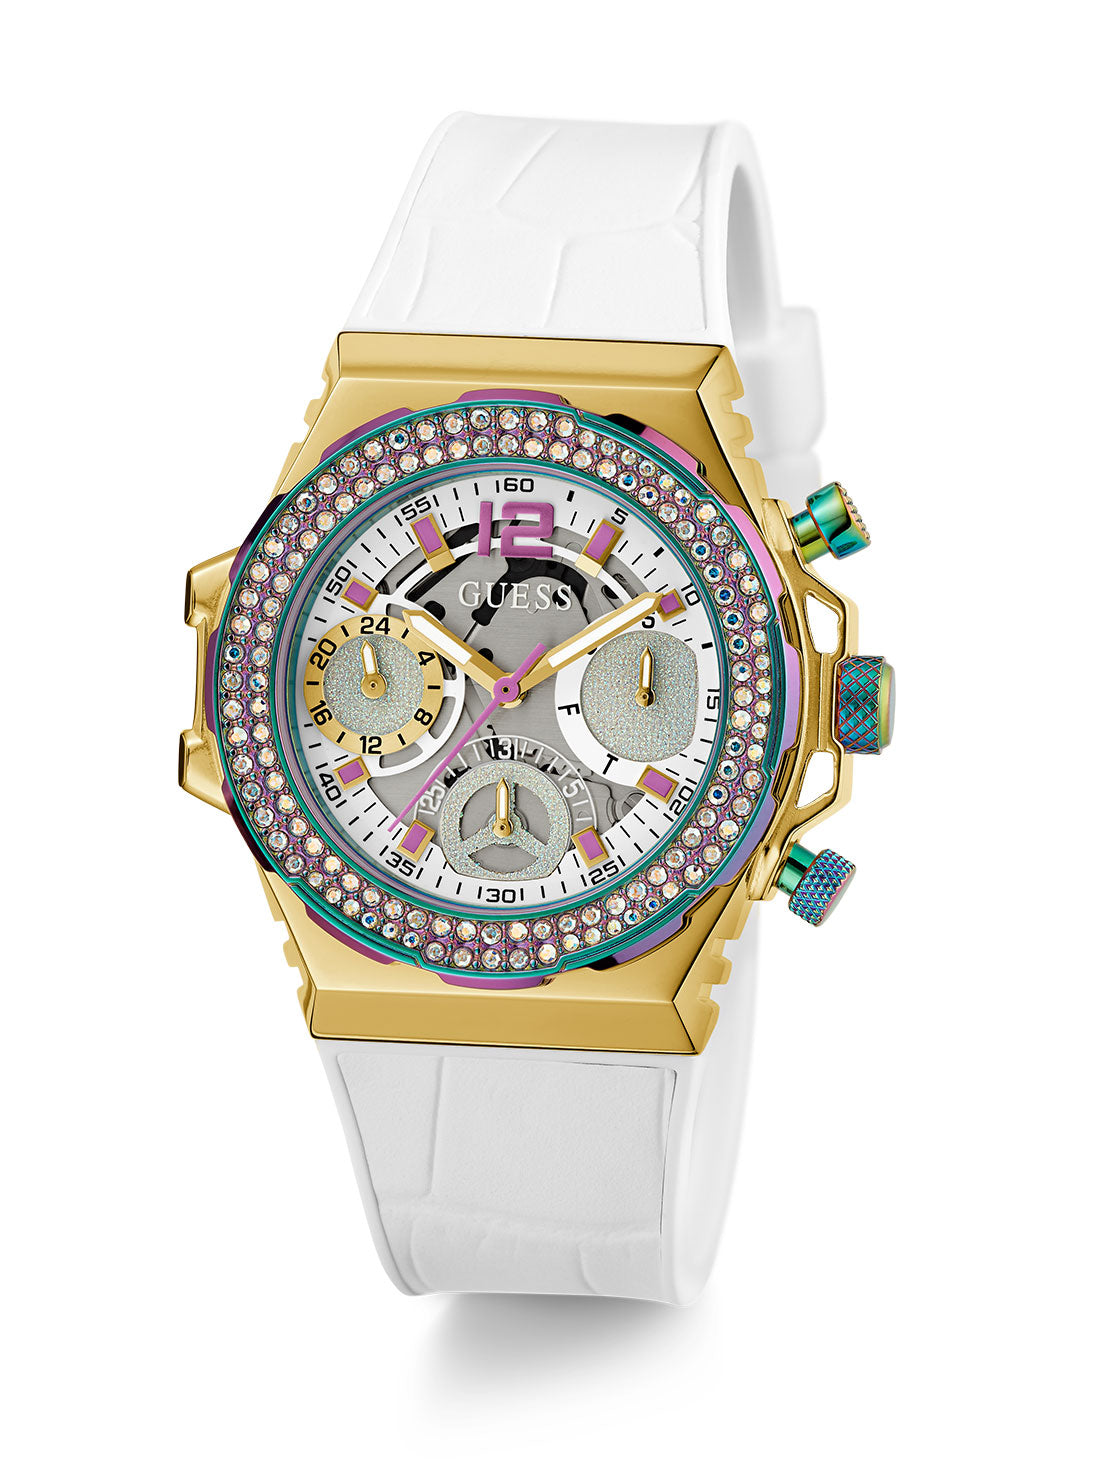 GUESS Women's White Irridescent Fusion Silicone Watch GW0553L2 Full View